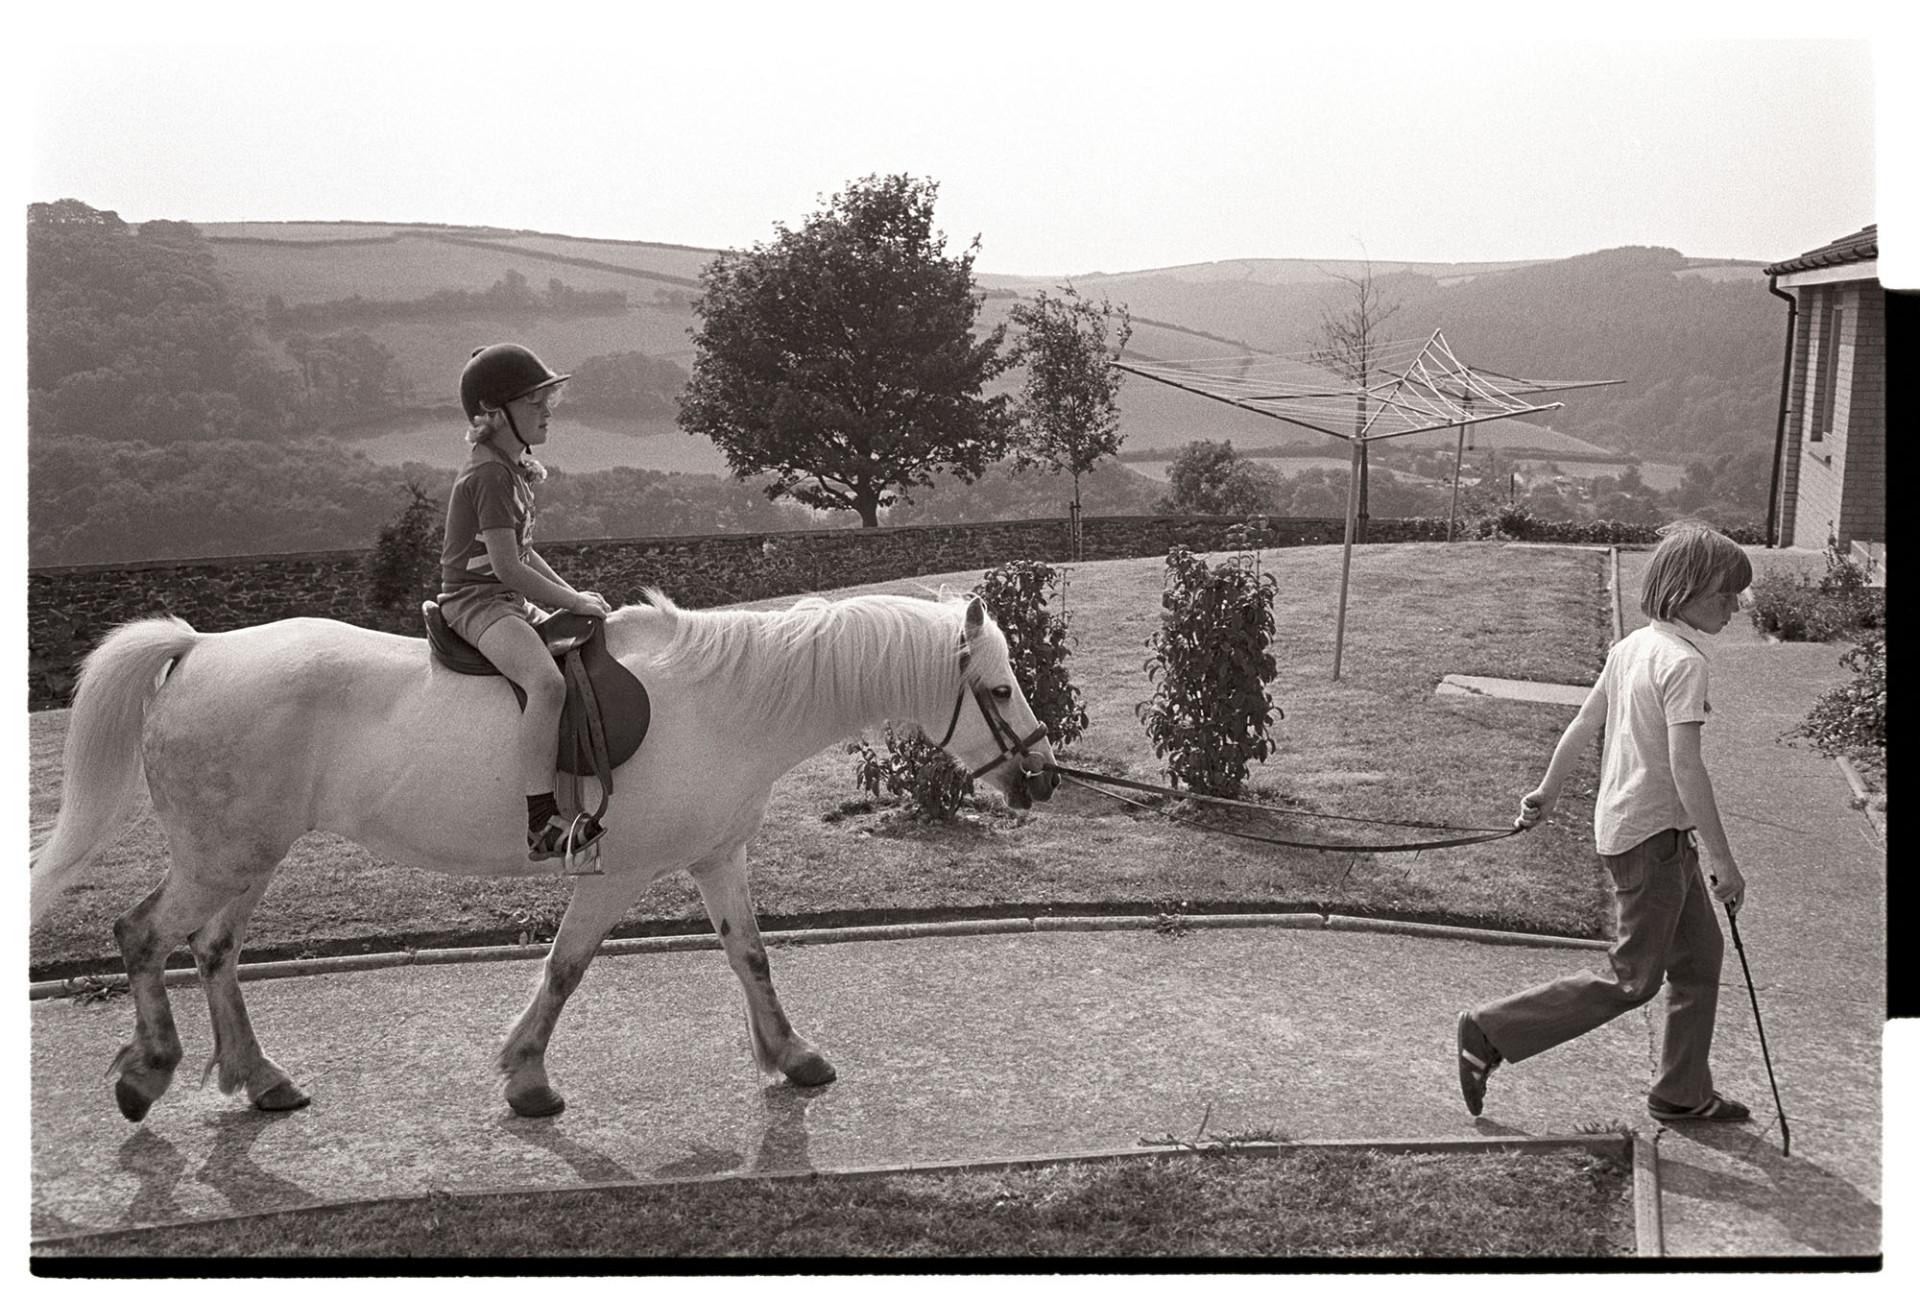 Pony rides for children at barbeque fete in grounds of sheltered homes. 
[A boy in shorts riding on a white pony being lead by another boy at a fete at Torridge View, Torrington. In the background a washing line is visible and a view to fields and hills in the distance.]